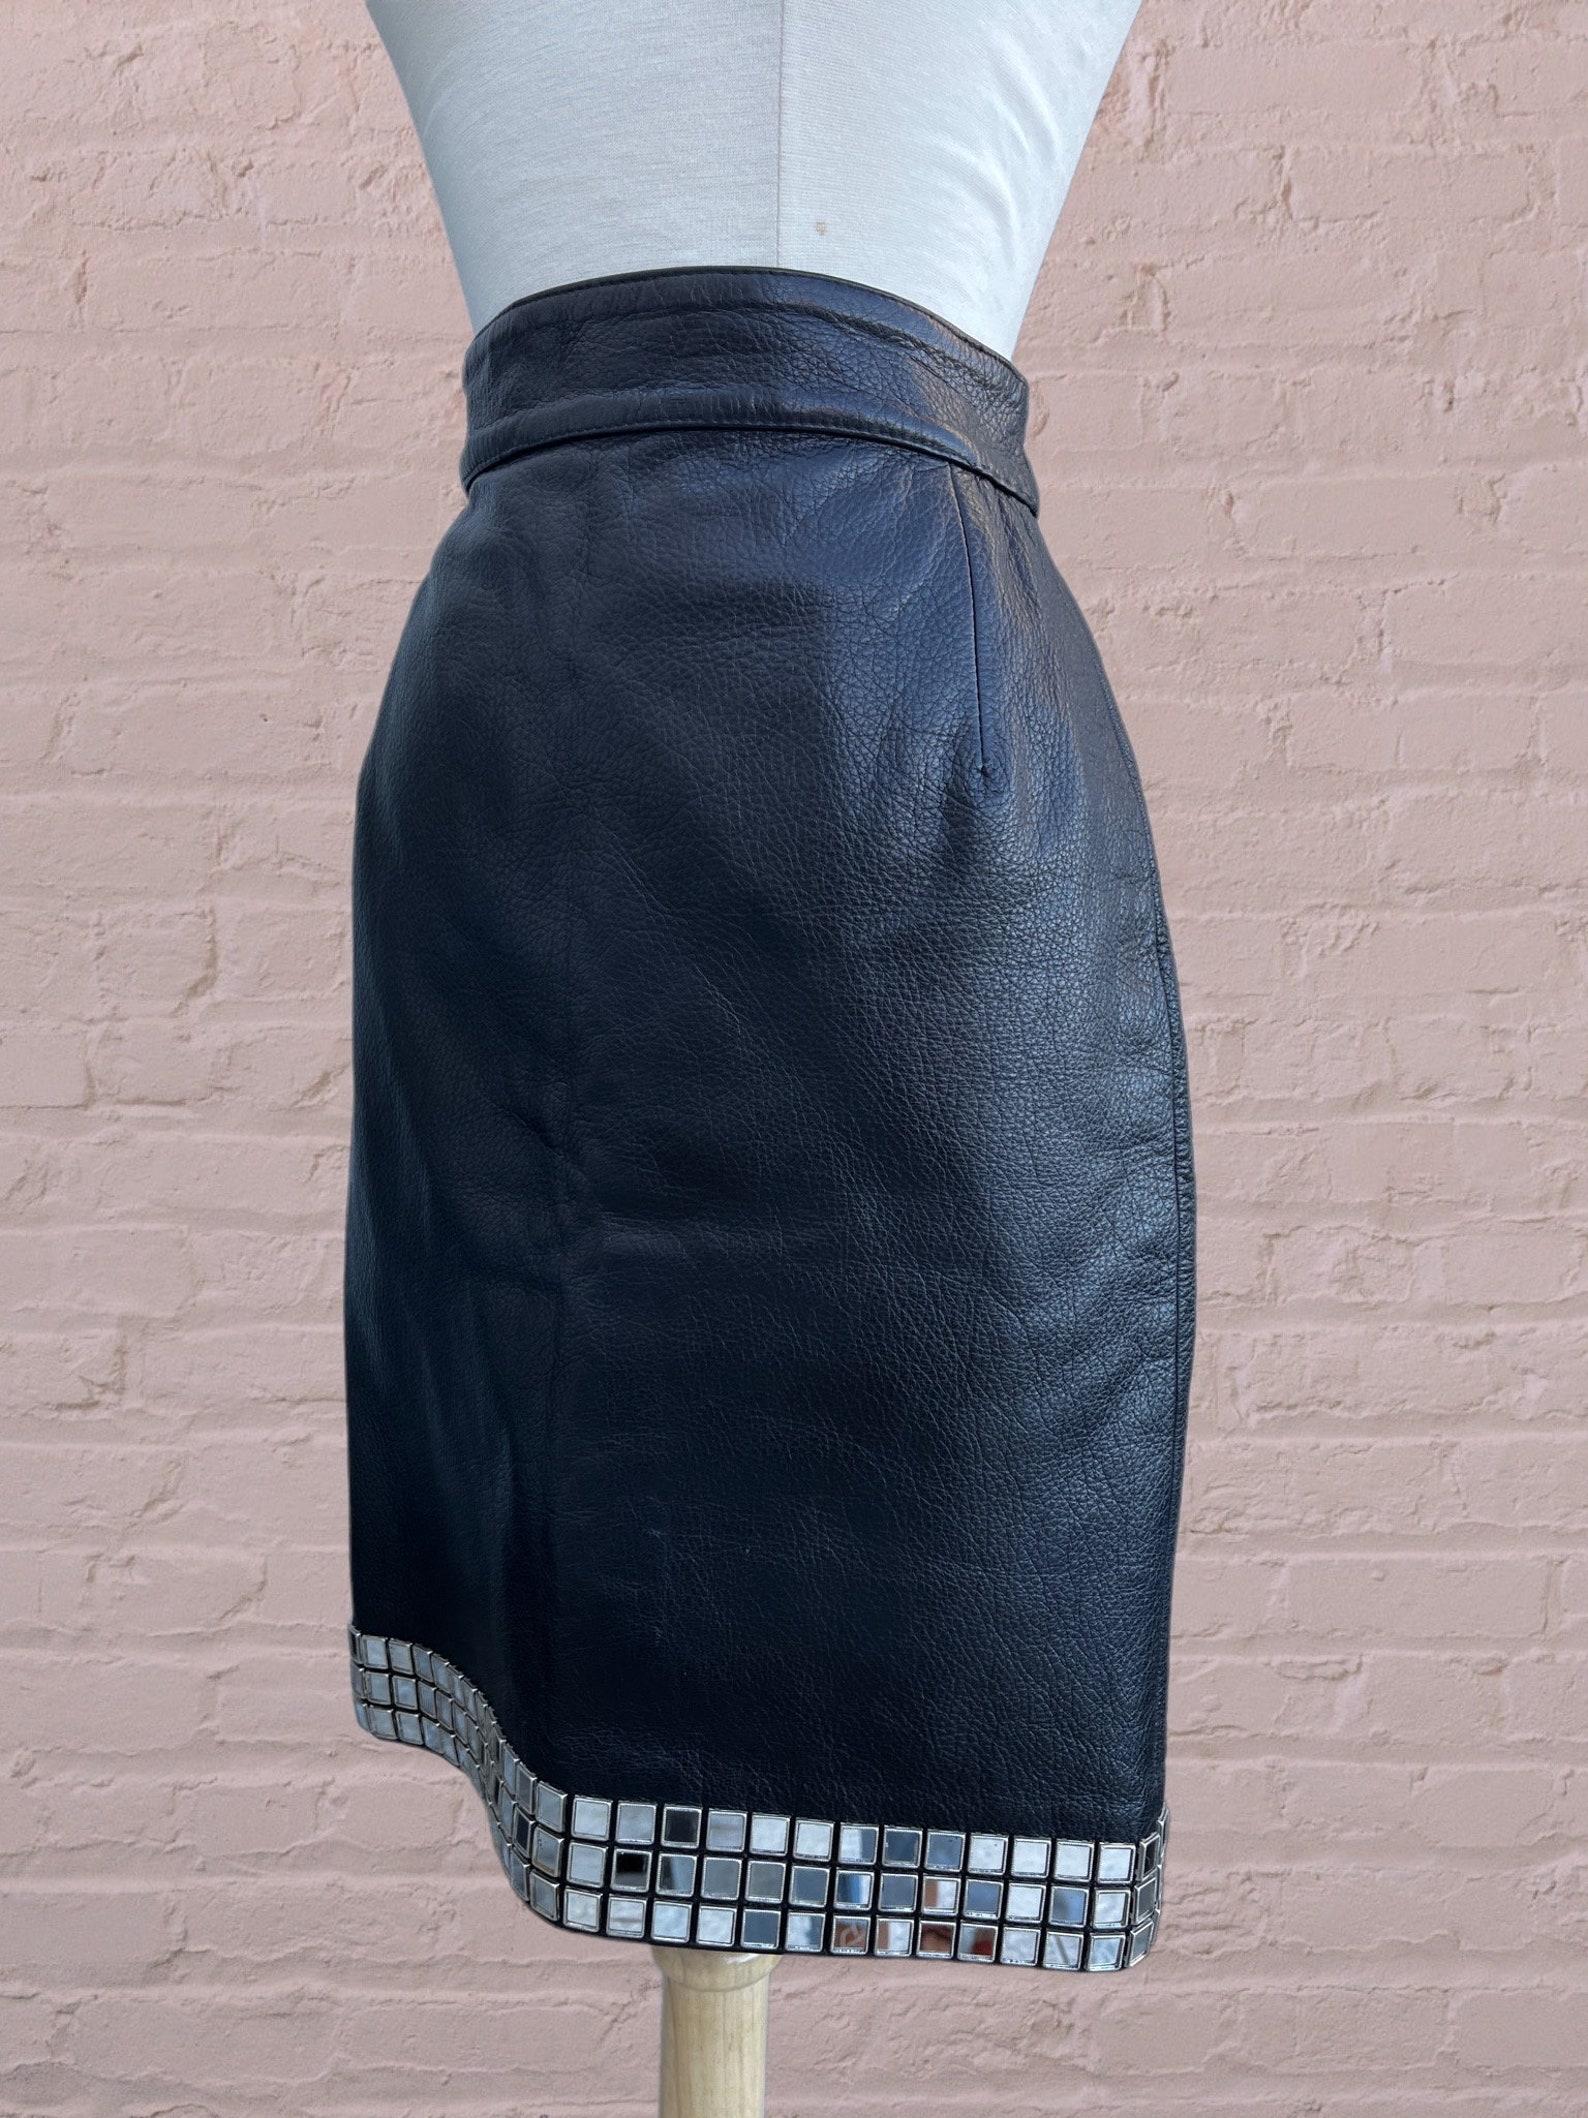 Moschino Black Leather Mirror Skirt, Circa 1990 For Sale 1